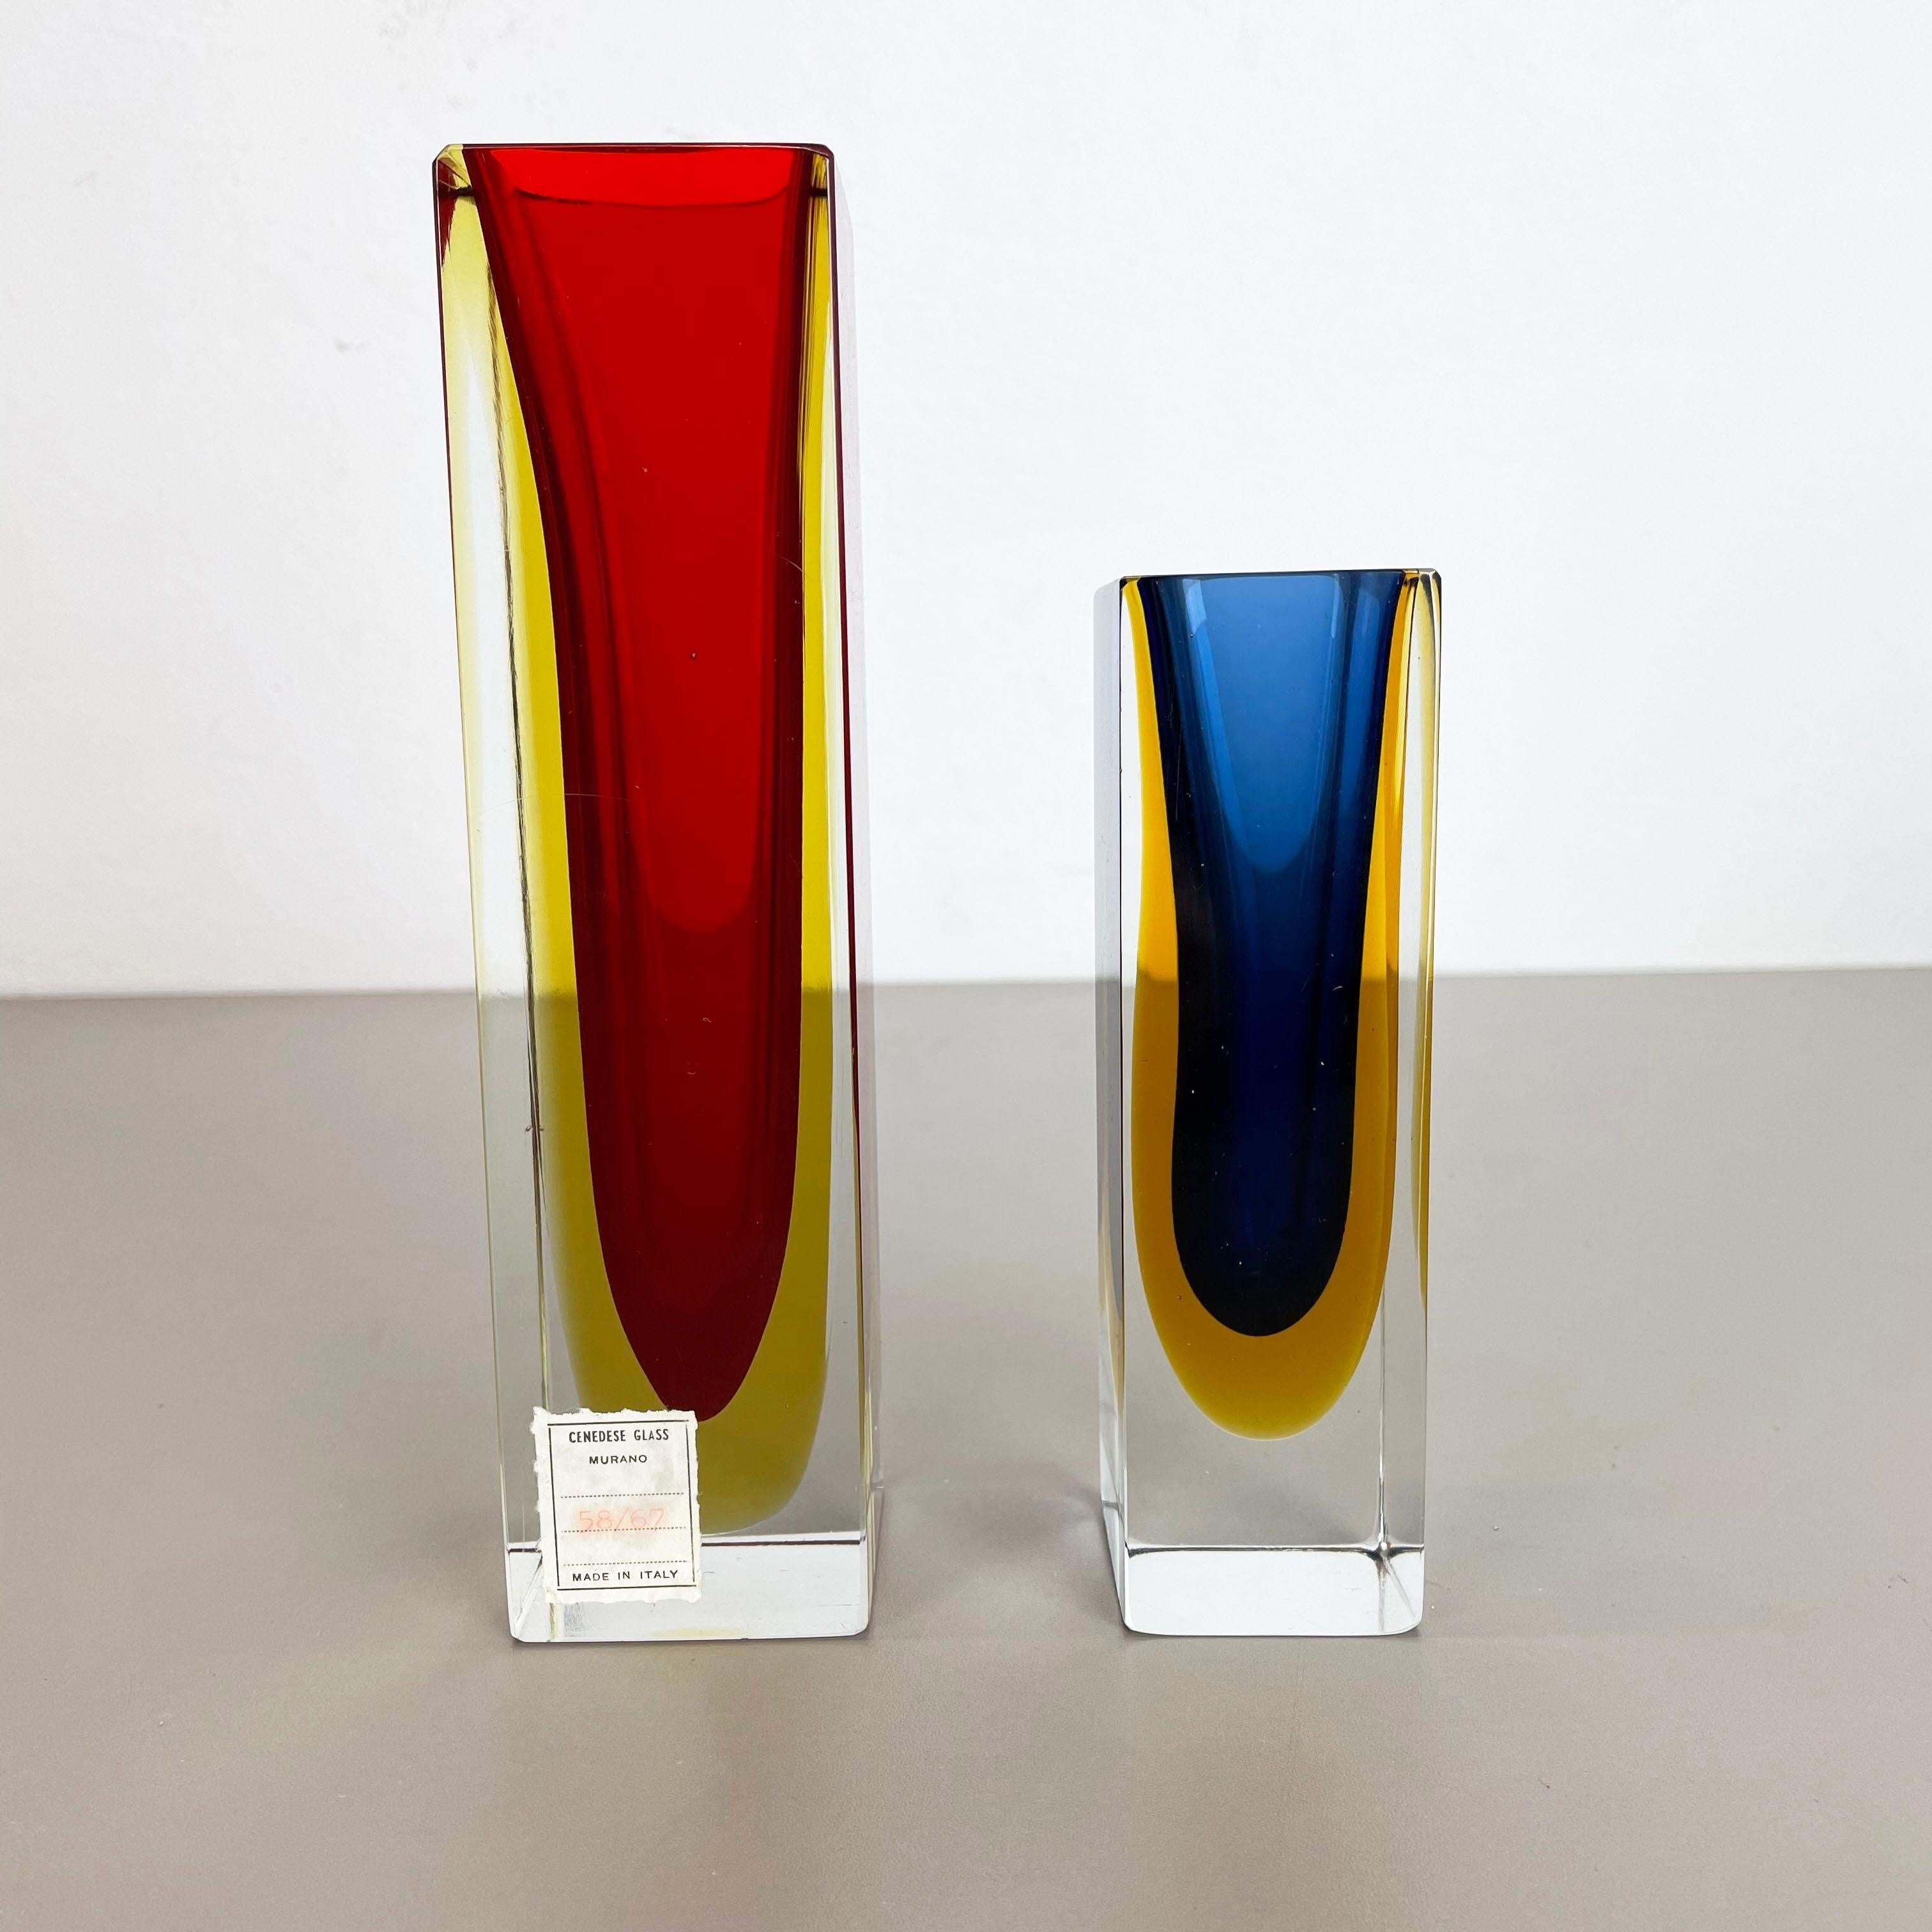 Article:

Murano glass vase set of 2


Producer:

Cendese Vetri ( one vase still features the original producer label)


Origin:

Murano, Italy


Decade:

1970s

These original set of 2 glass vases was produced in the 1970s in